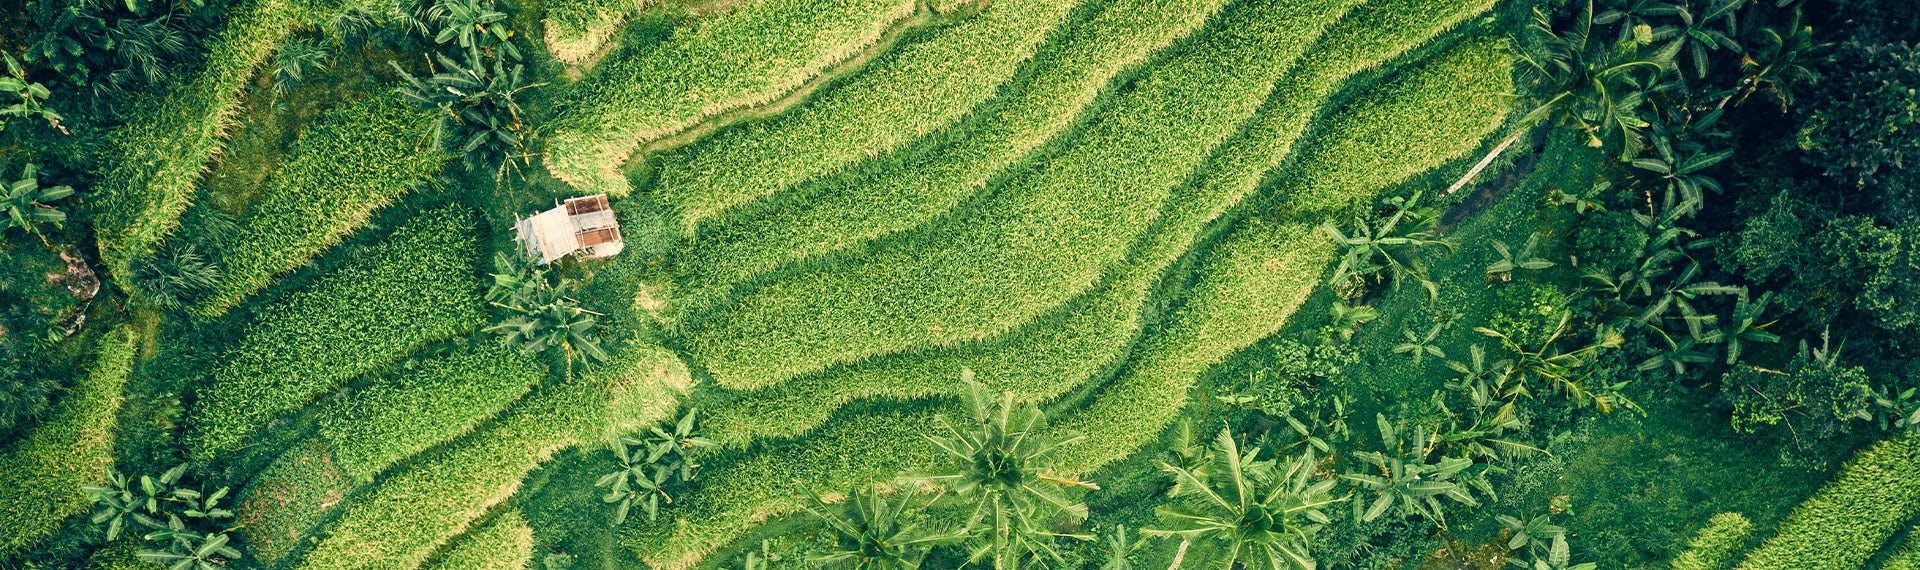 Aerial view of rice terraces in guangdong, china.